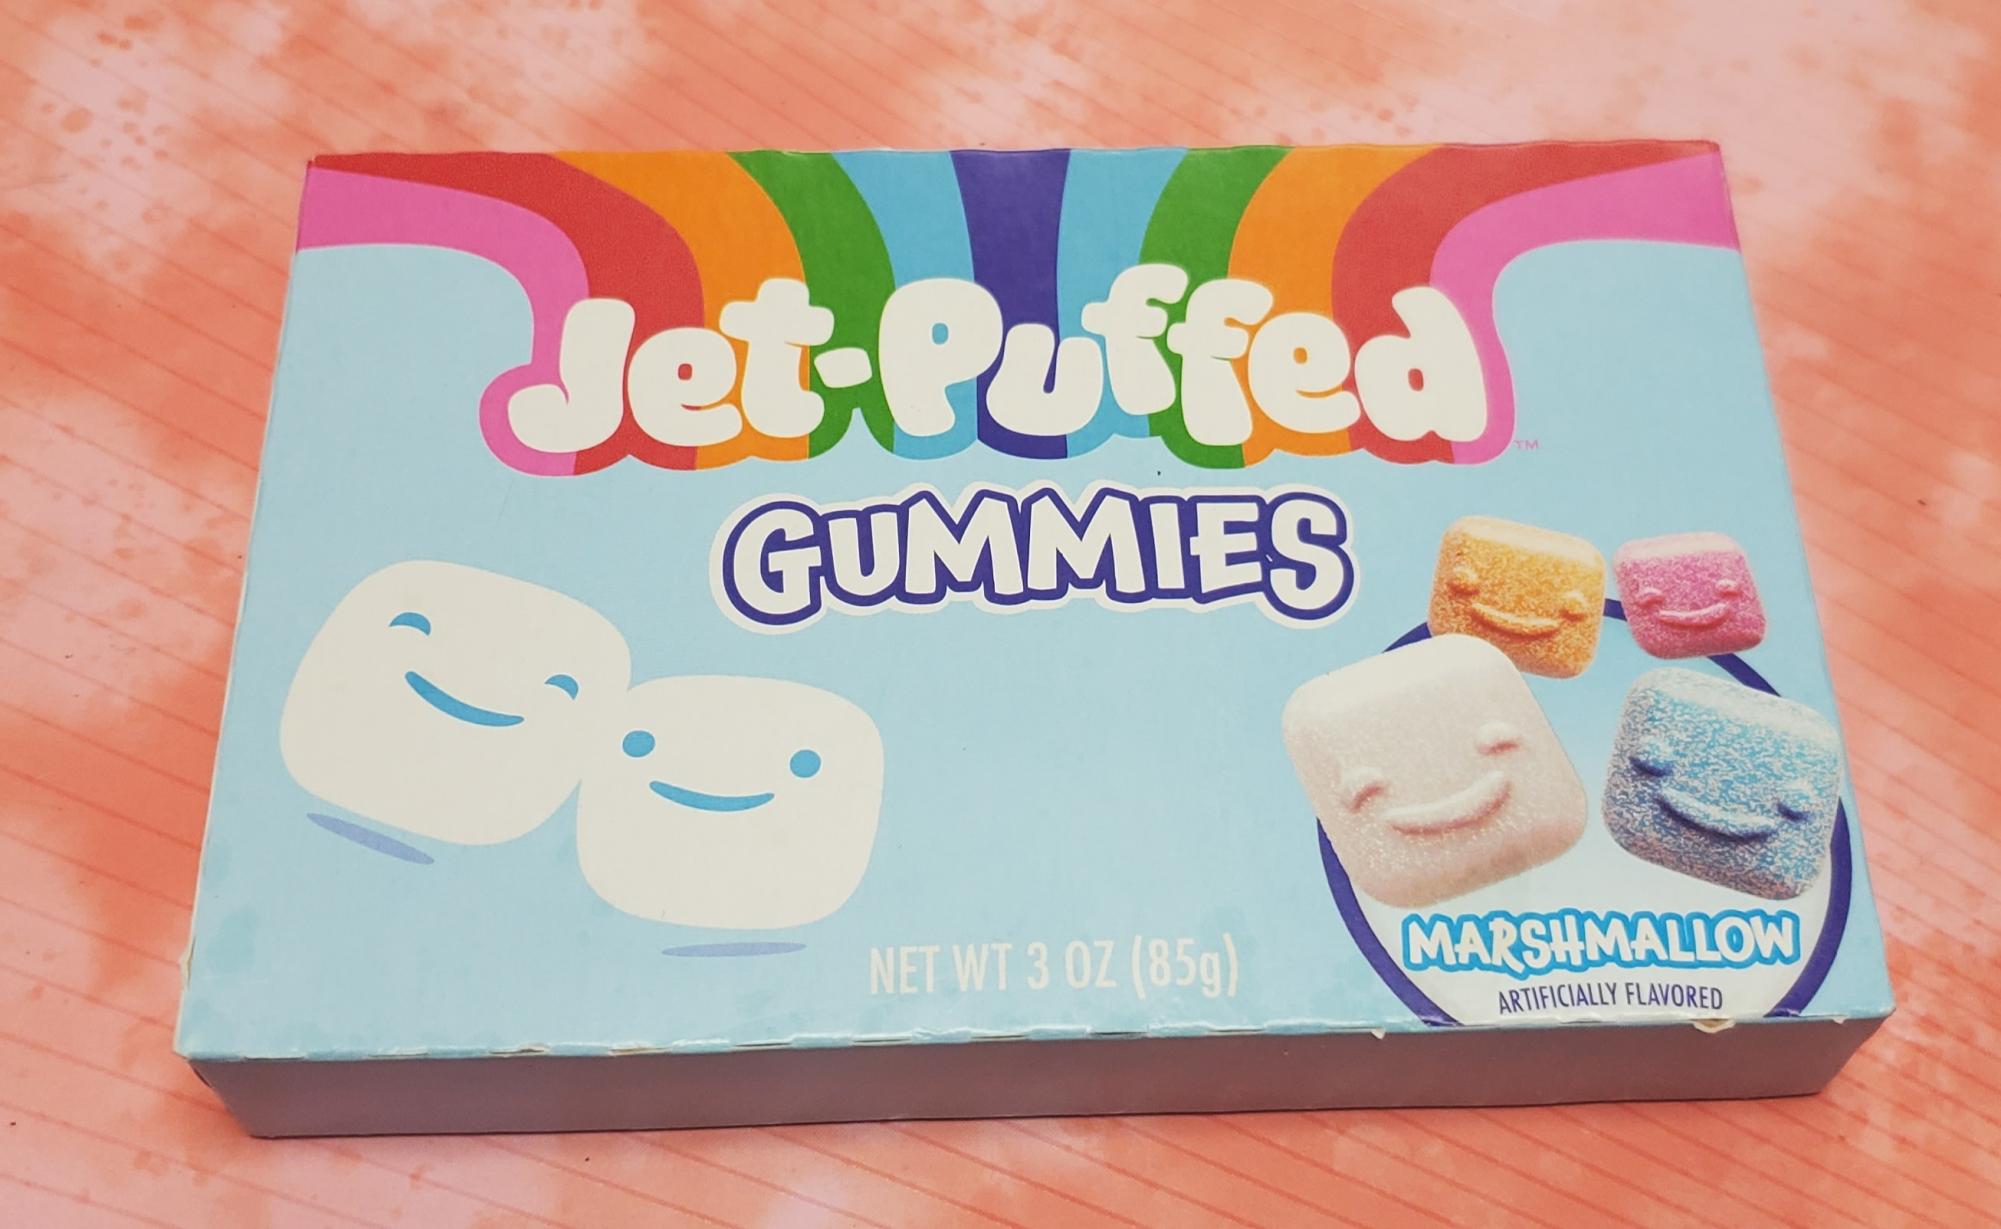 According to Blair Candy, the candy is described as “a delightful marriage of fluffy marshmallow and tangy blue raspberry flavors, all packed into one irresistible gummy!”